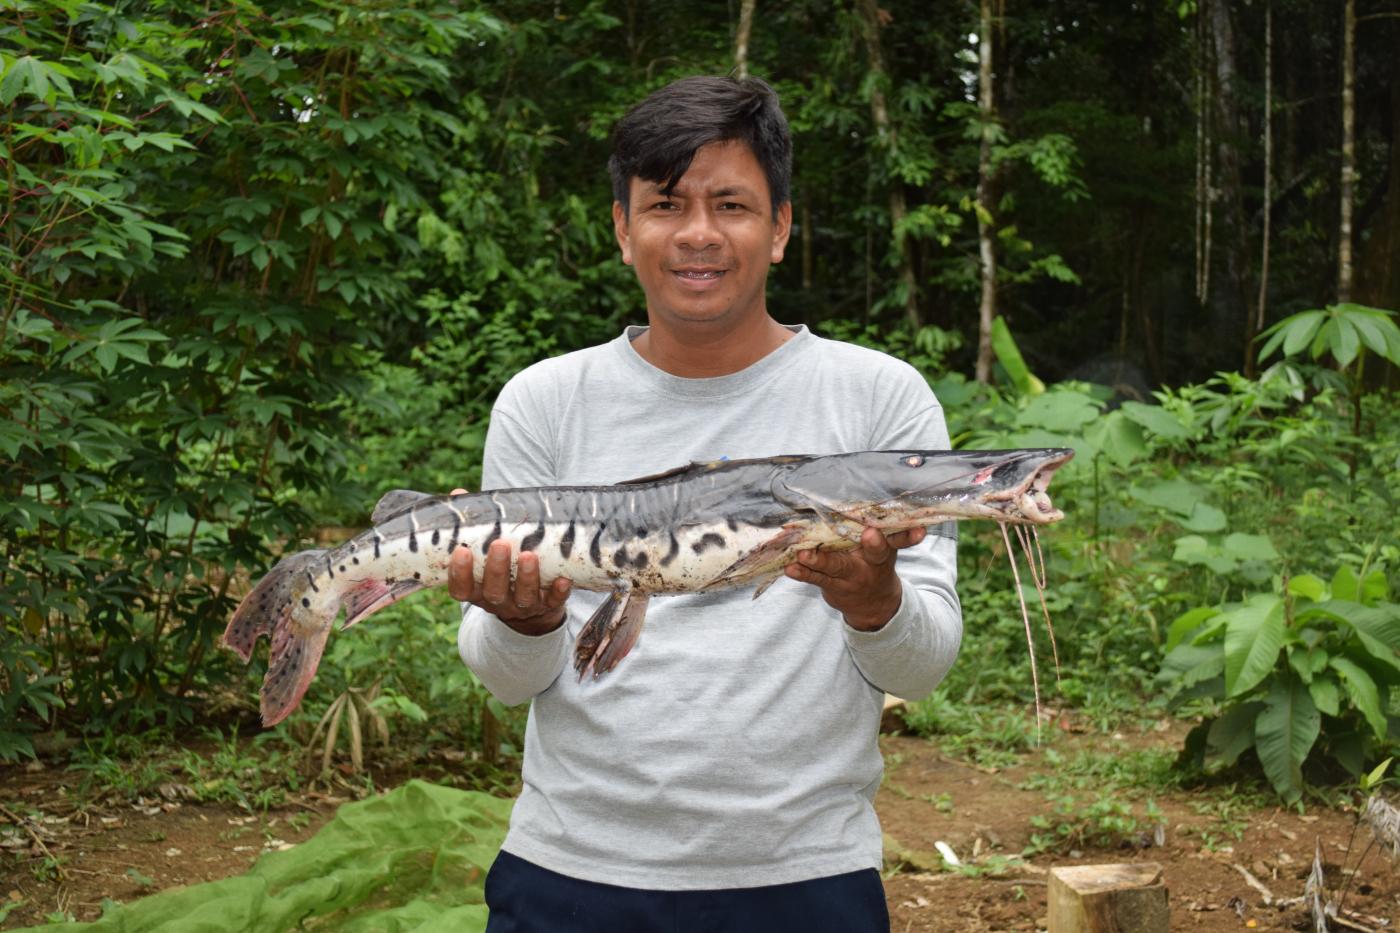 A fish researcher in the Peruvian Amazon holds a spotted tiger shovelnose catfish